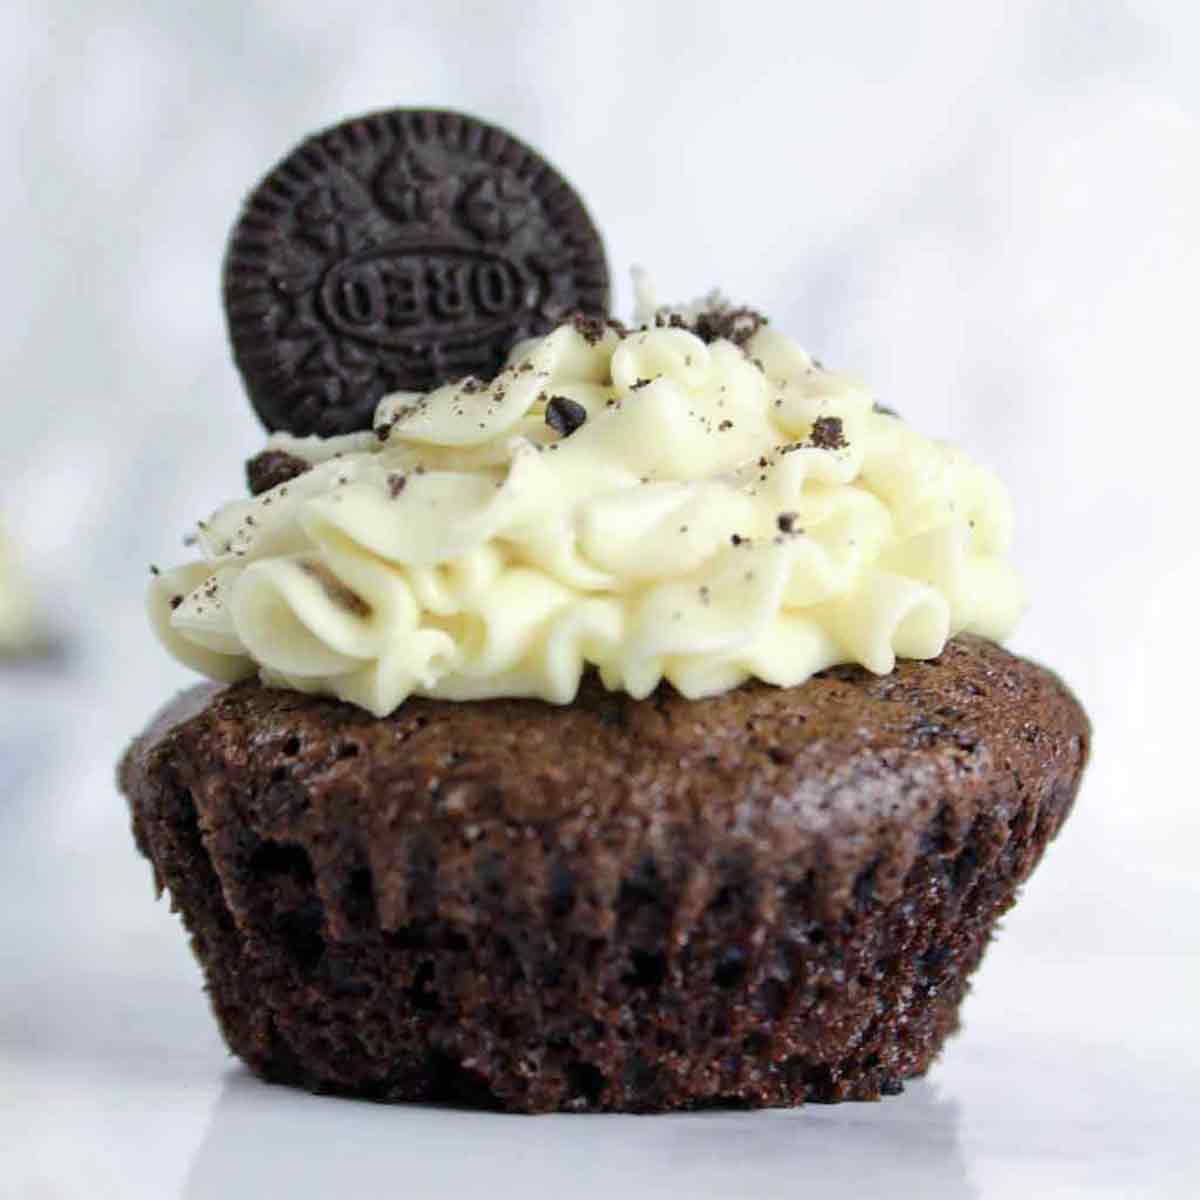 A Vegan Oreo Cupcake With Frosting On Top